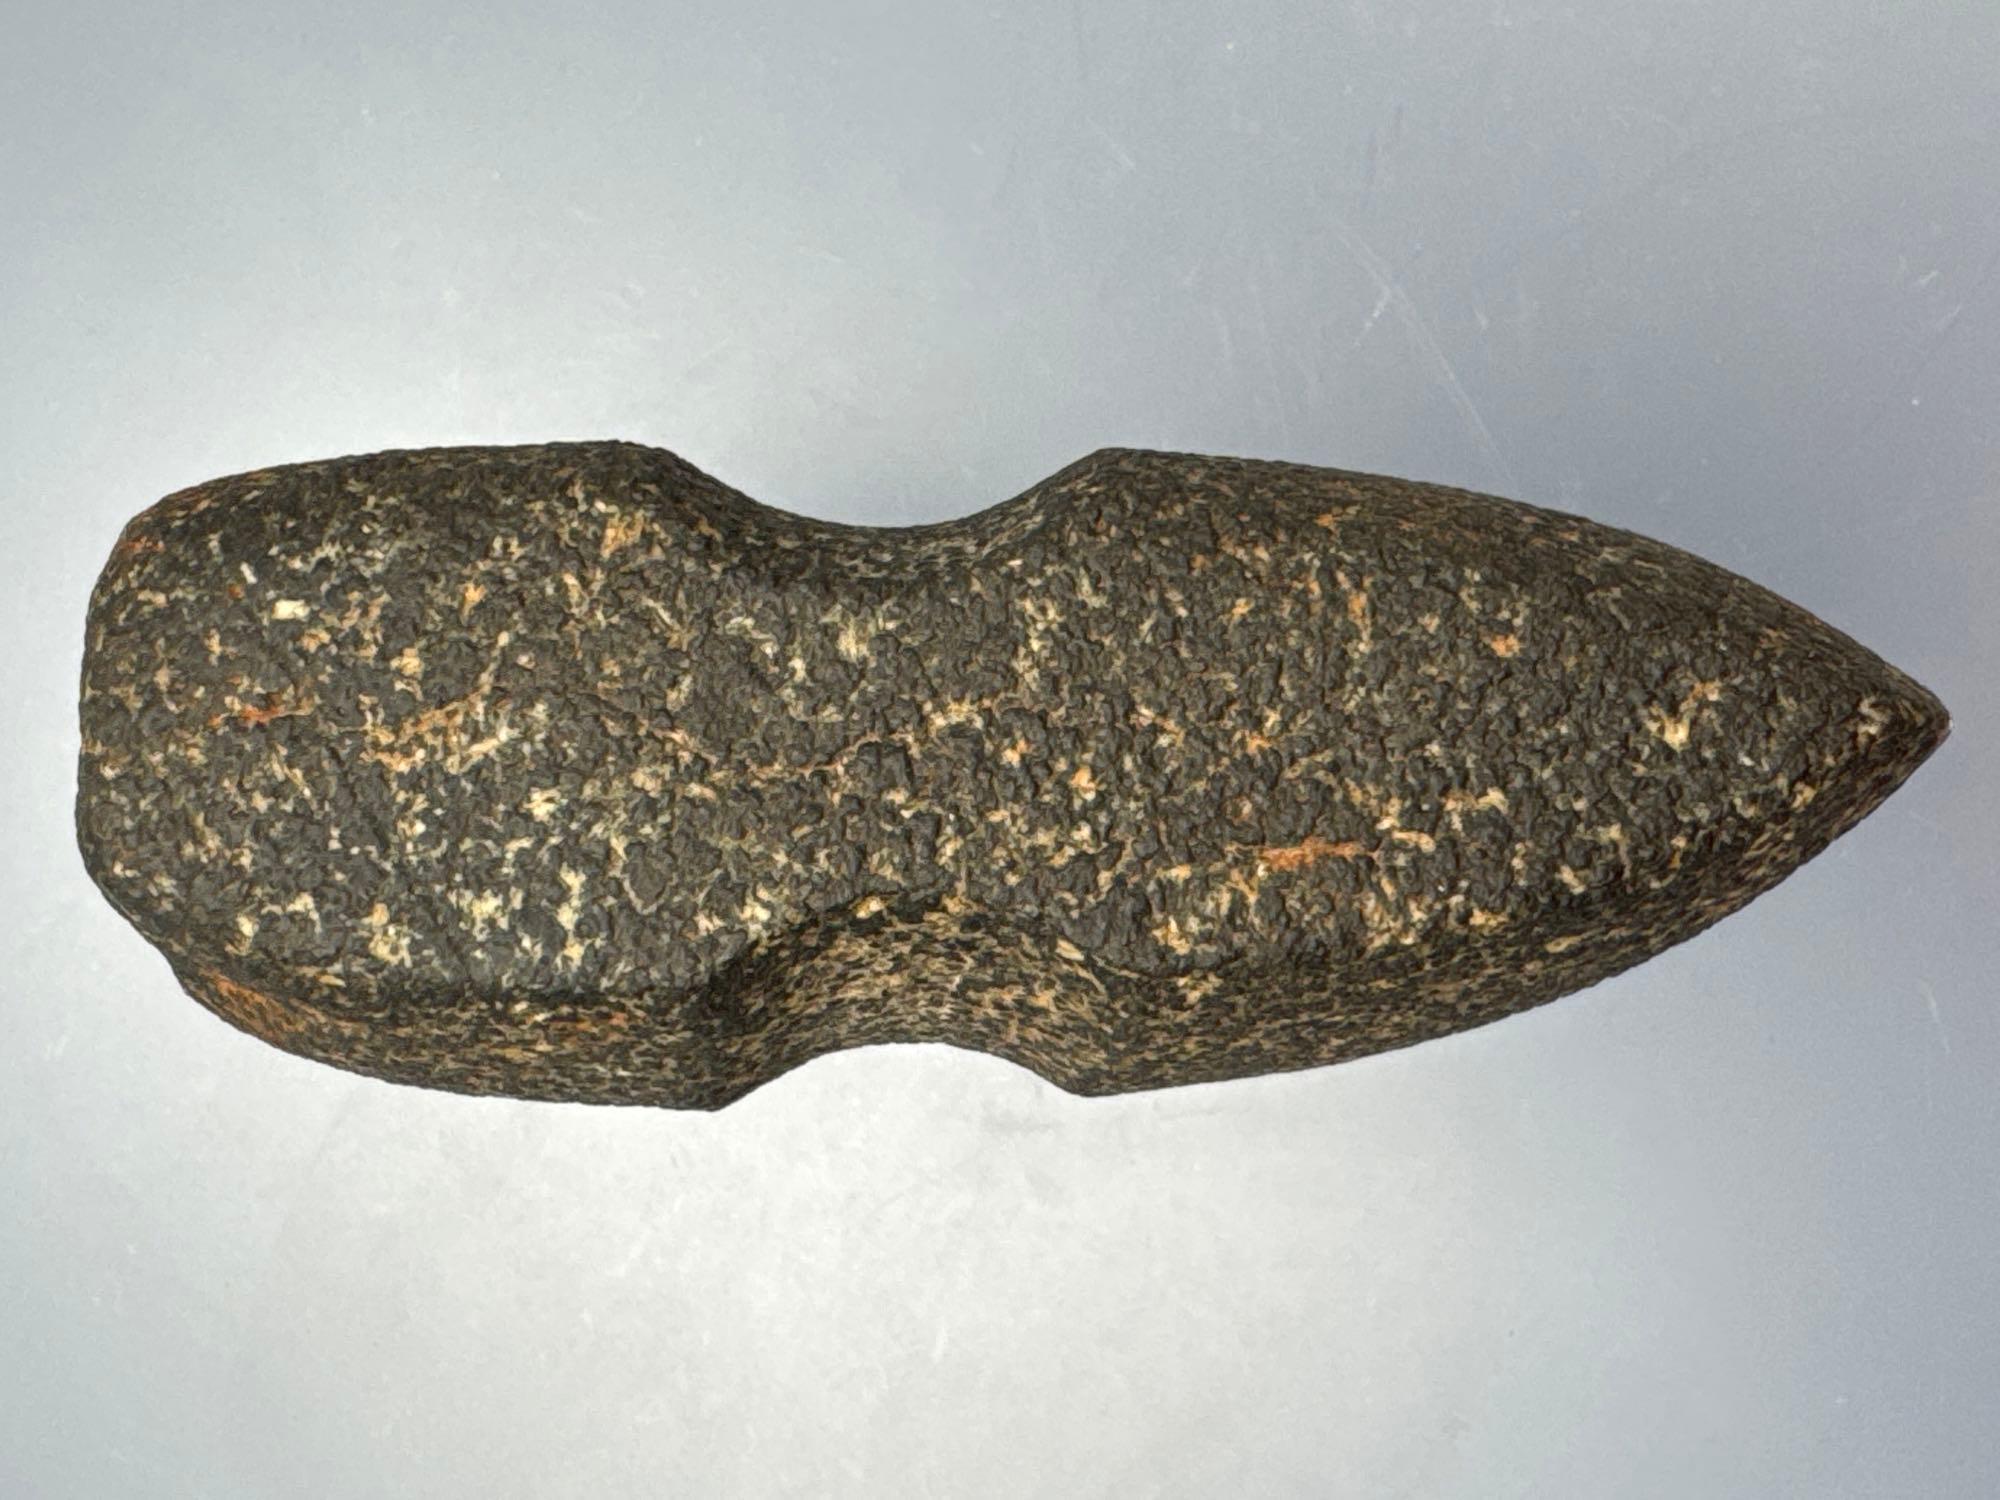 4 1/2" Keokuk 1/2 Grooved Axe, Found in Louisa Co., Iowa, Ex: Grant, Moody Collections